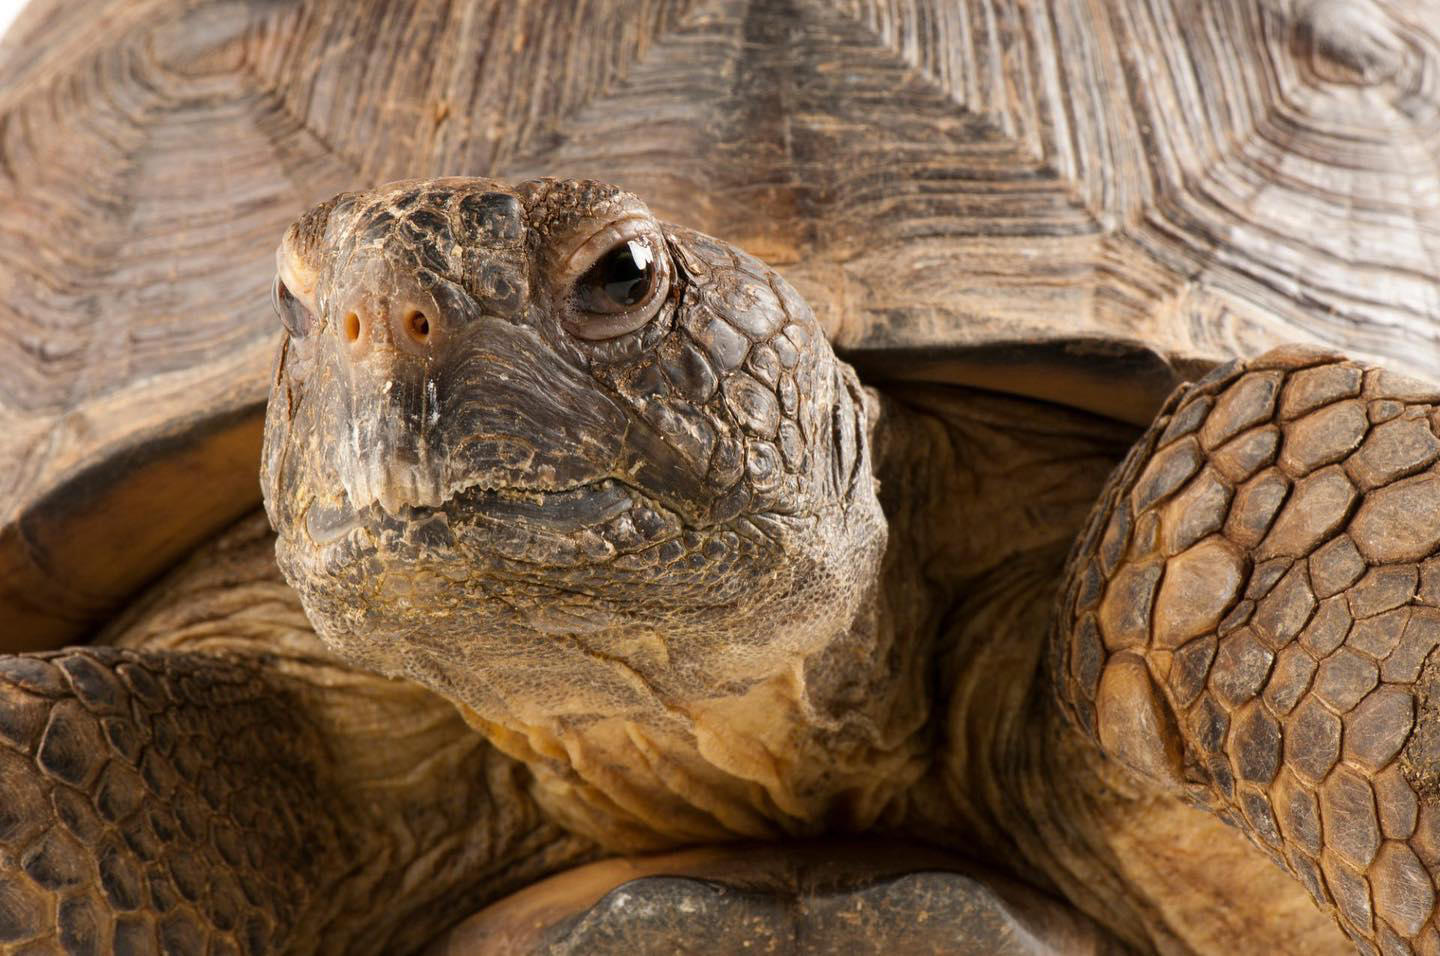 Gopher tortoises face a potentially deadly journey when they come across busy highways as they have